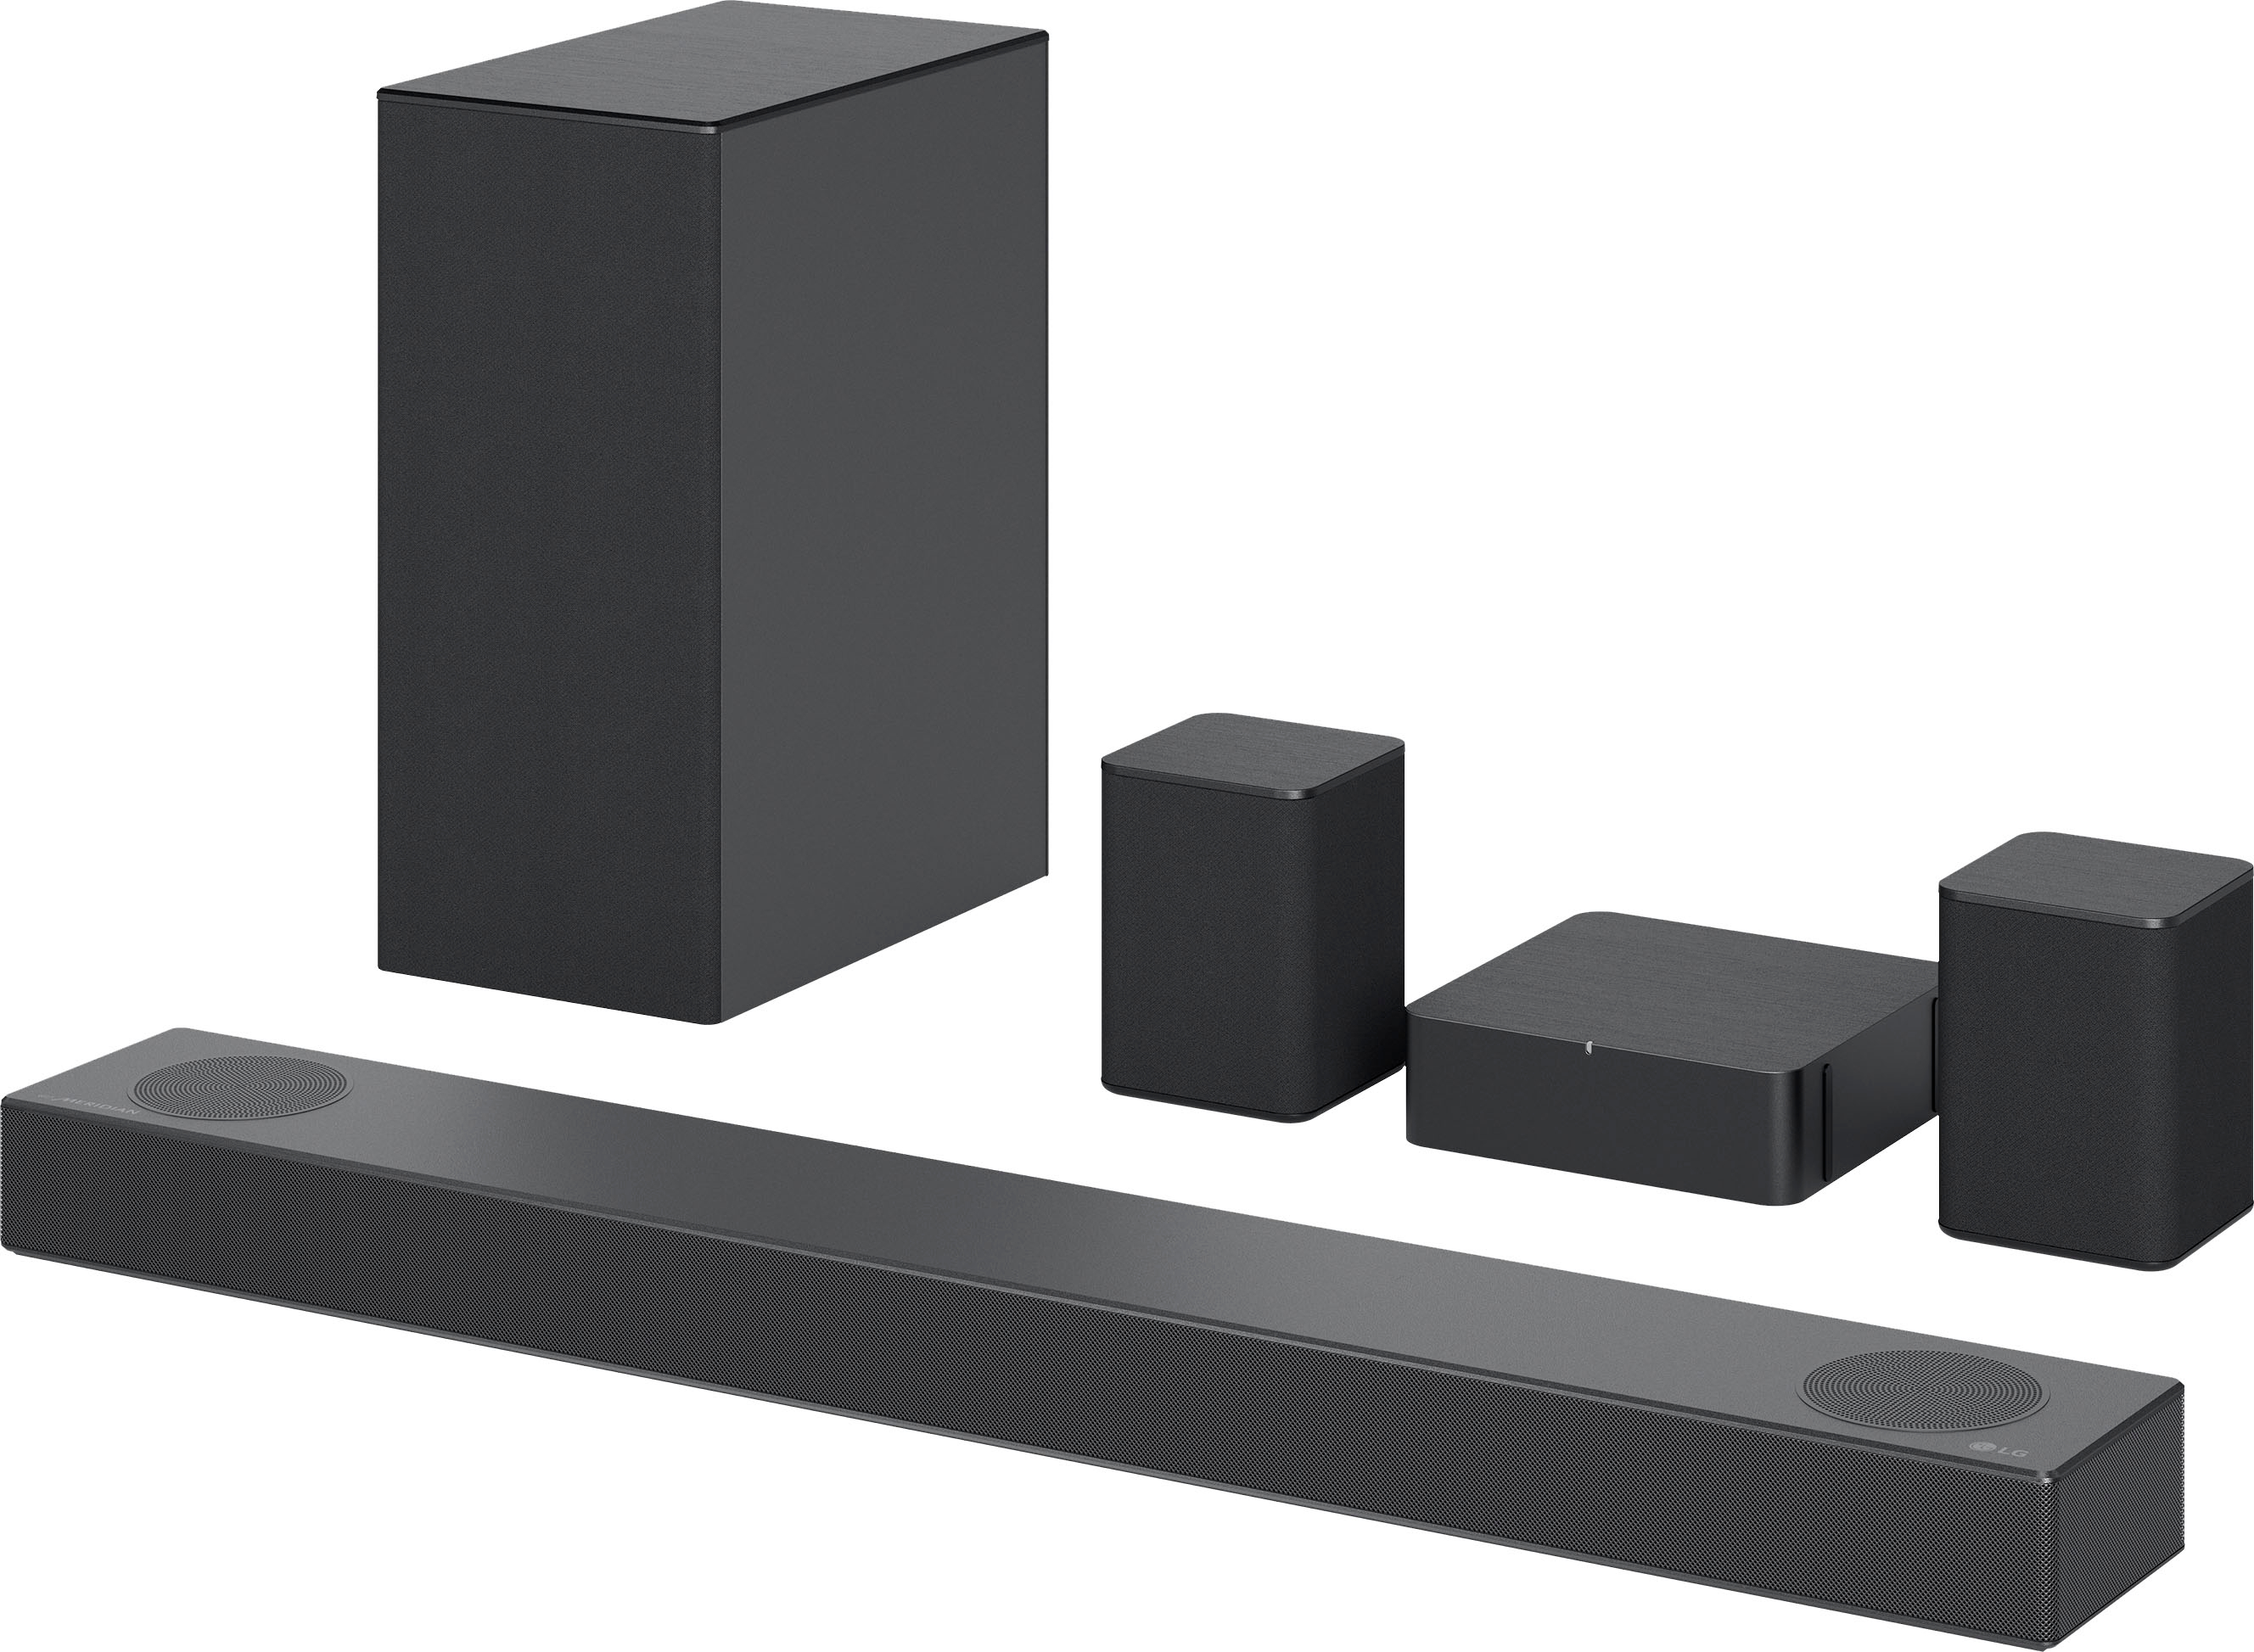 LG - 5.1.2 Channel Soundbar with Wireless Subwoofer, Dolby Atmos and DTS:X - Black $300